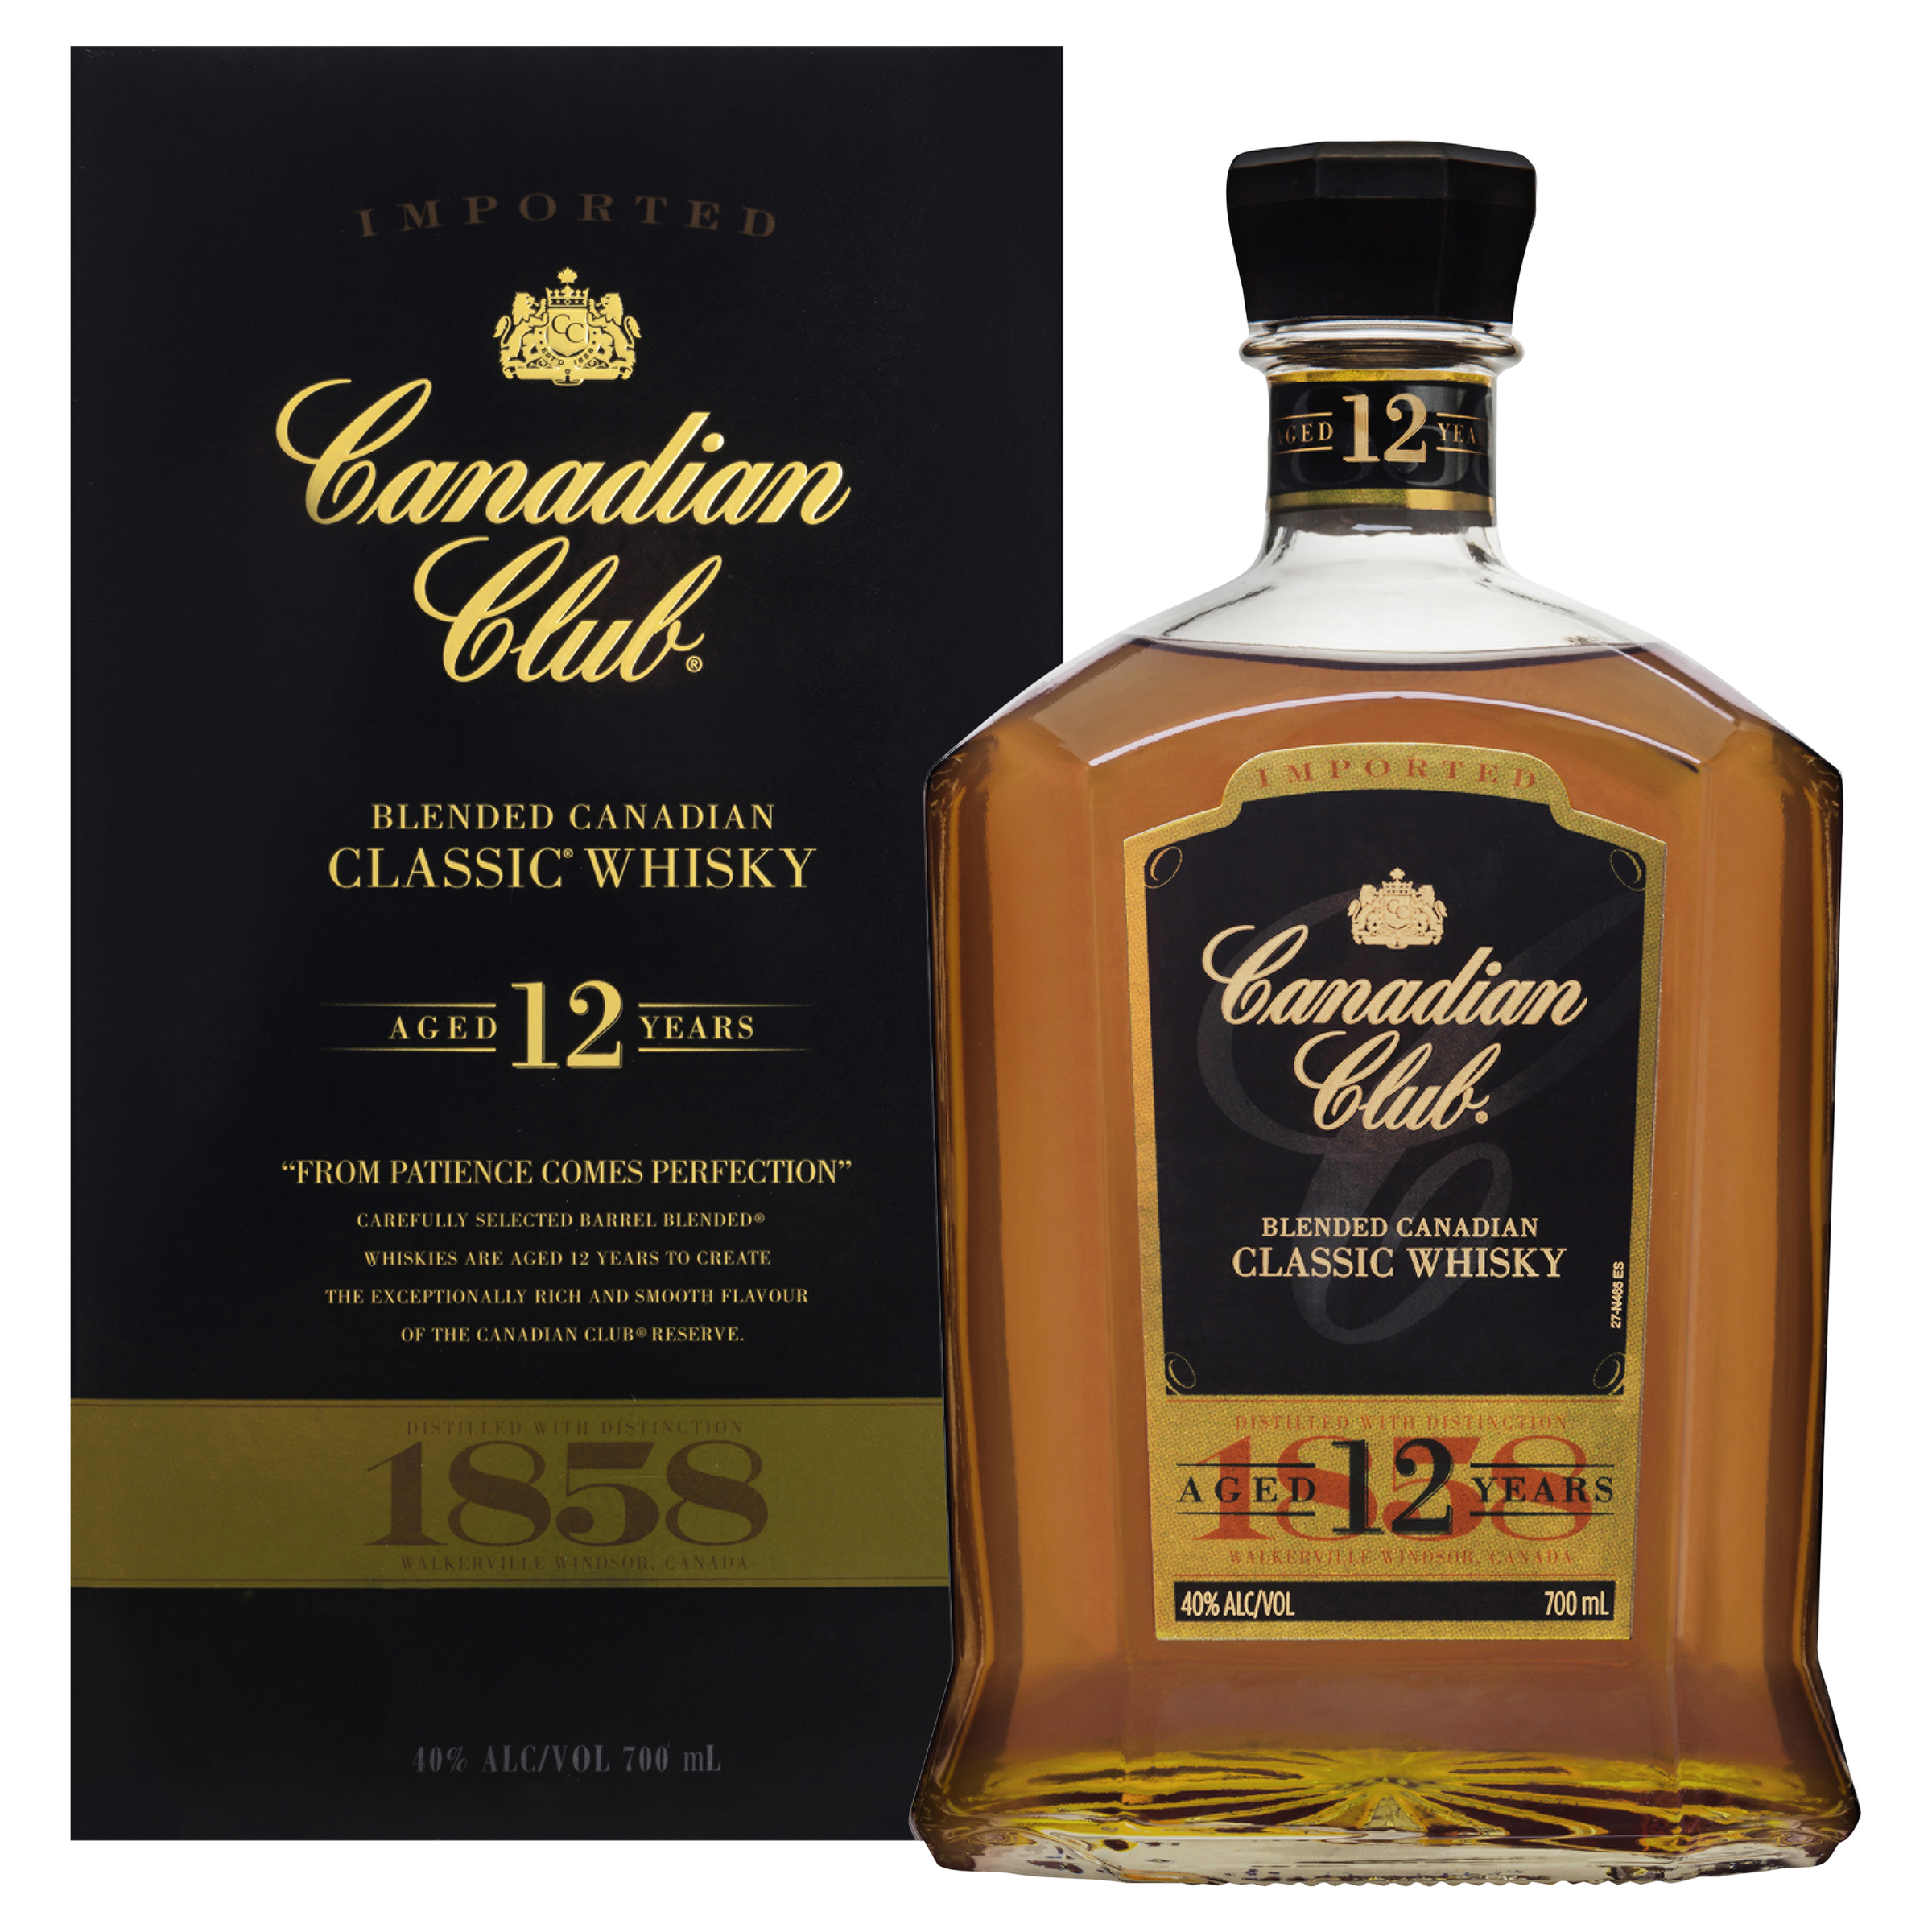 CANADIAN CLUB 12 YEAR OLD WHISKY